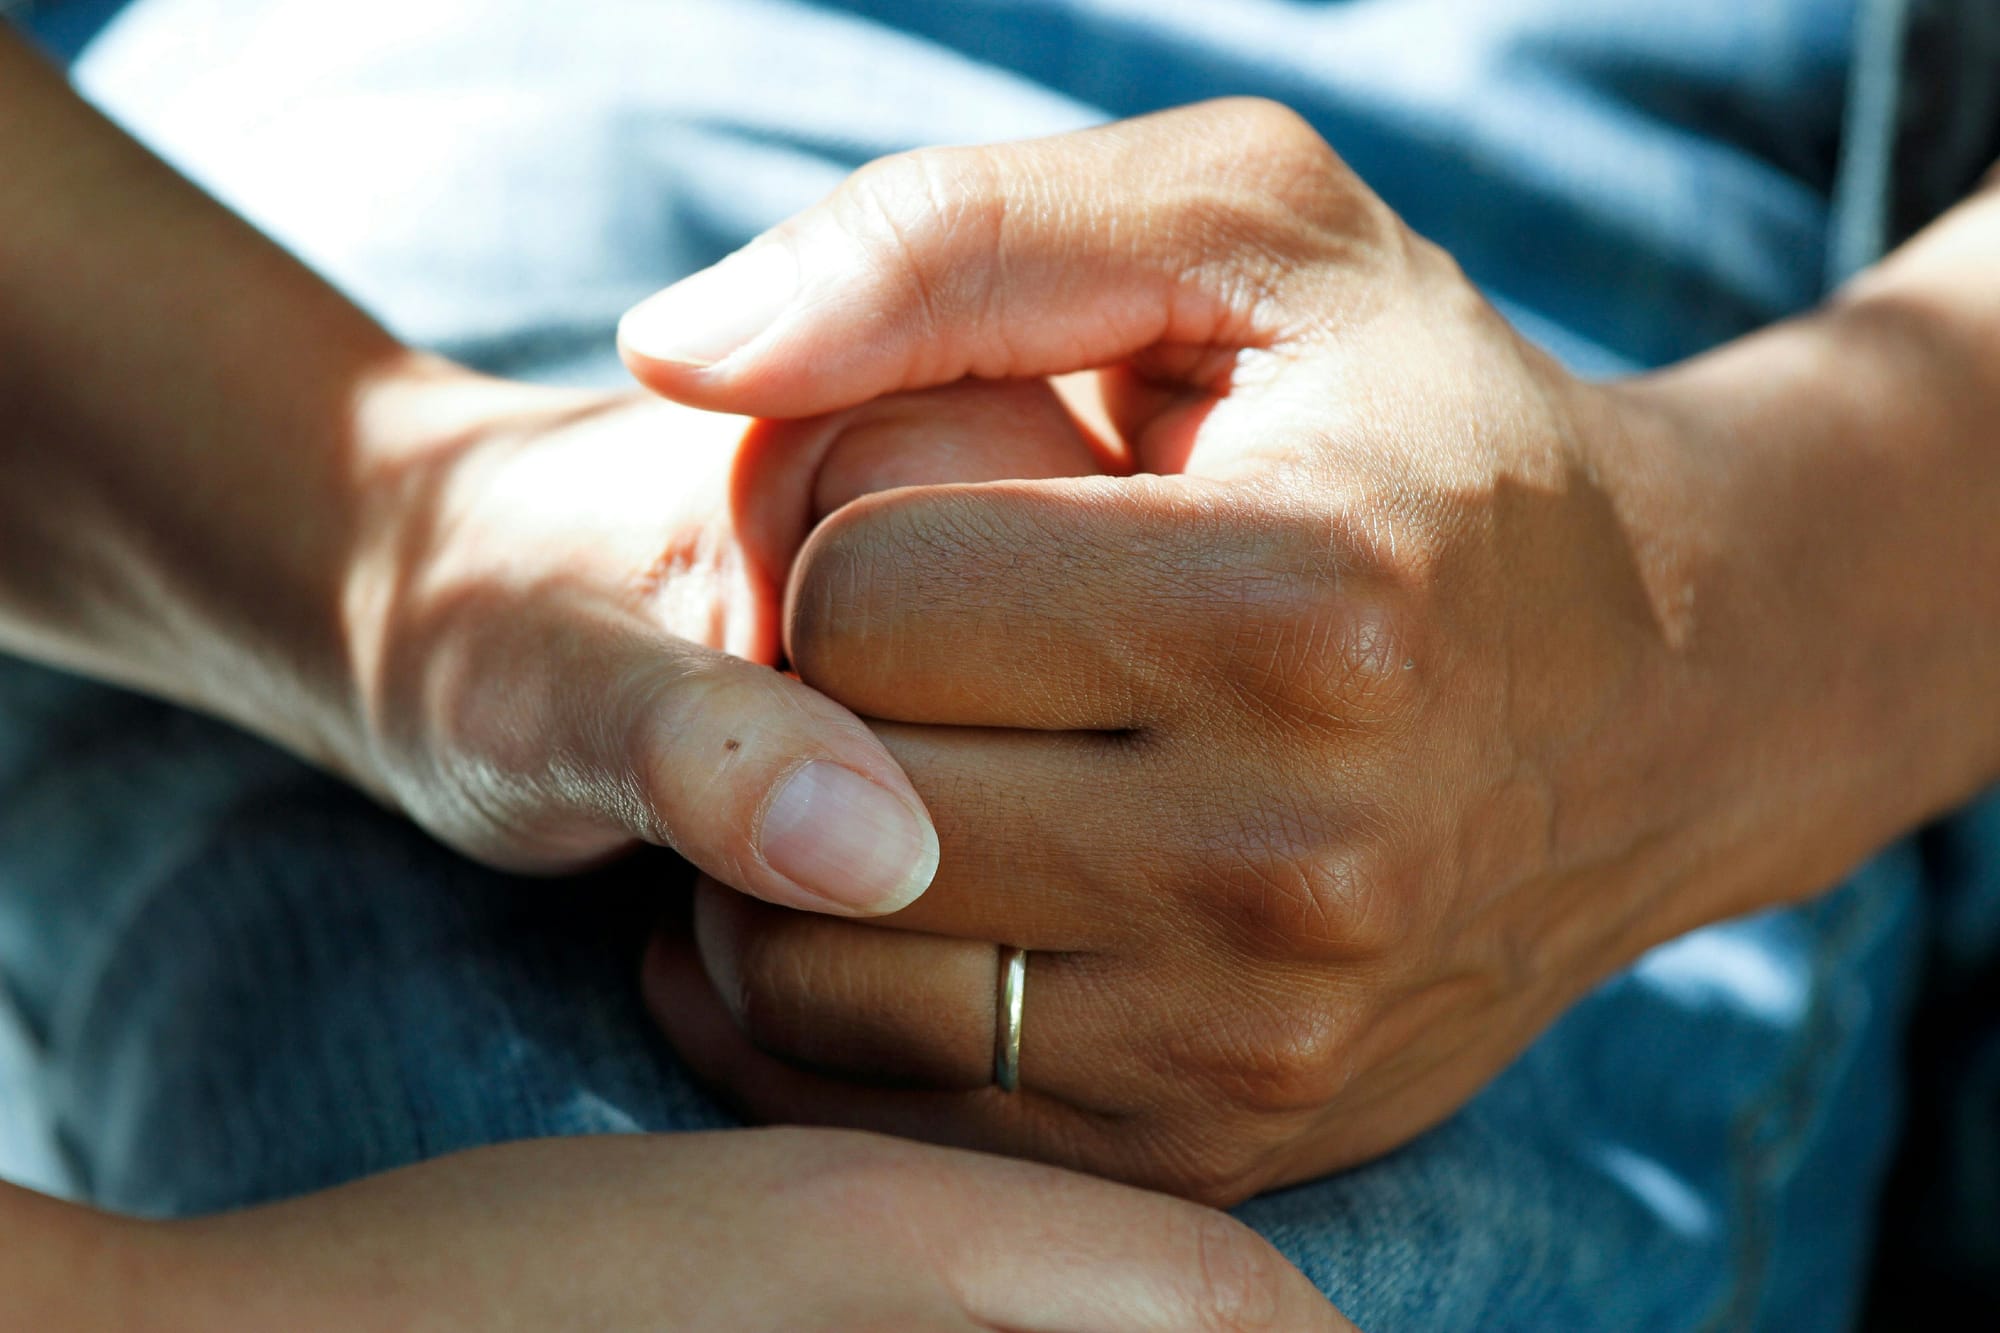 A close up of two people holding hands. One hand has a wedding band on their finger.